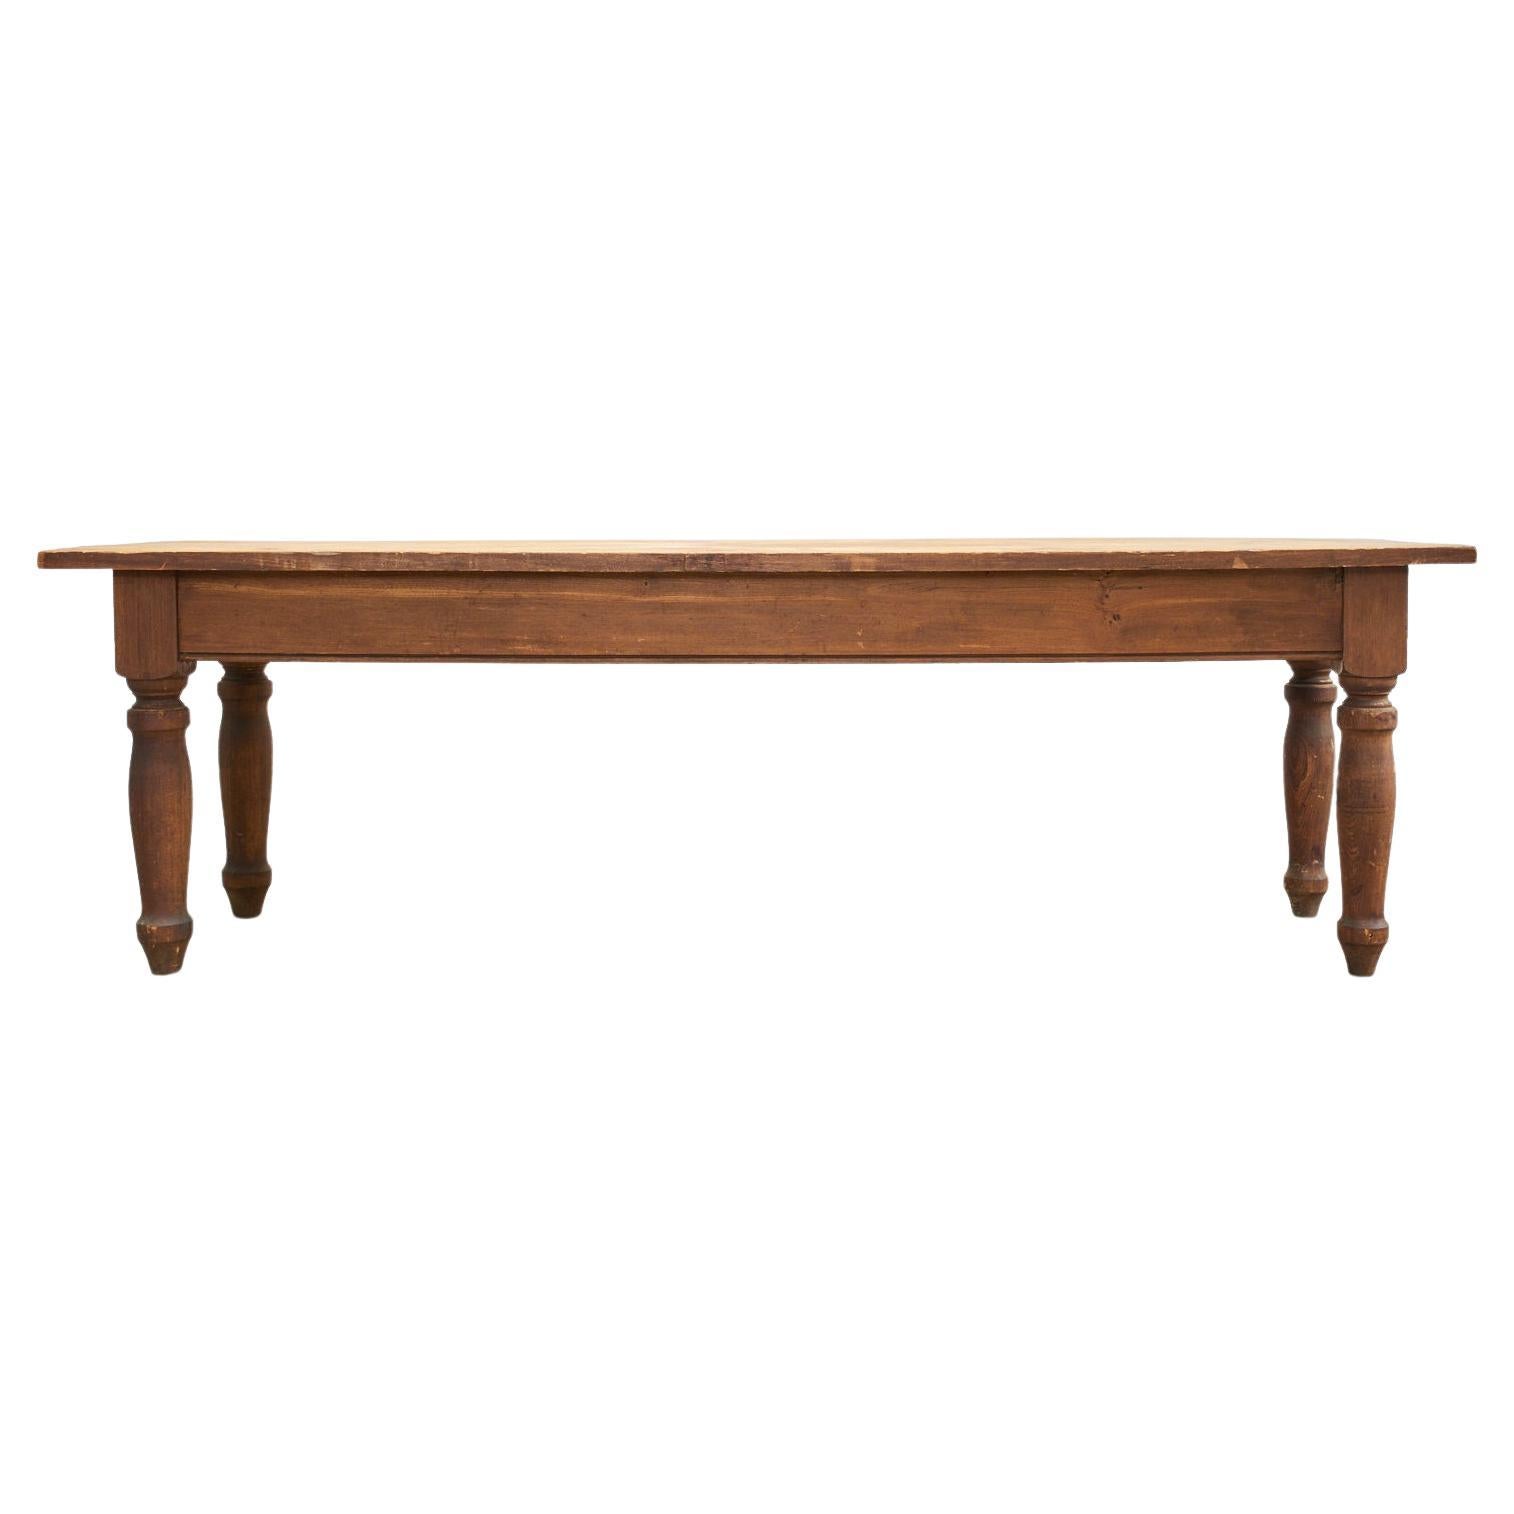 19th Century American General Store Farmhouse Work Table For Sale